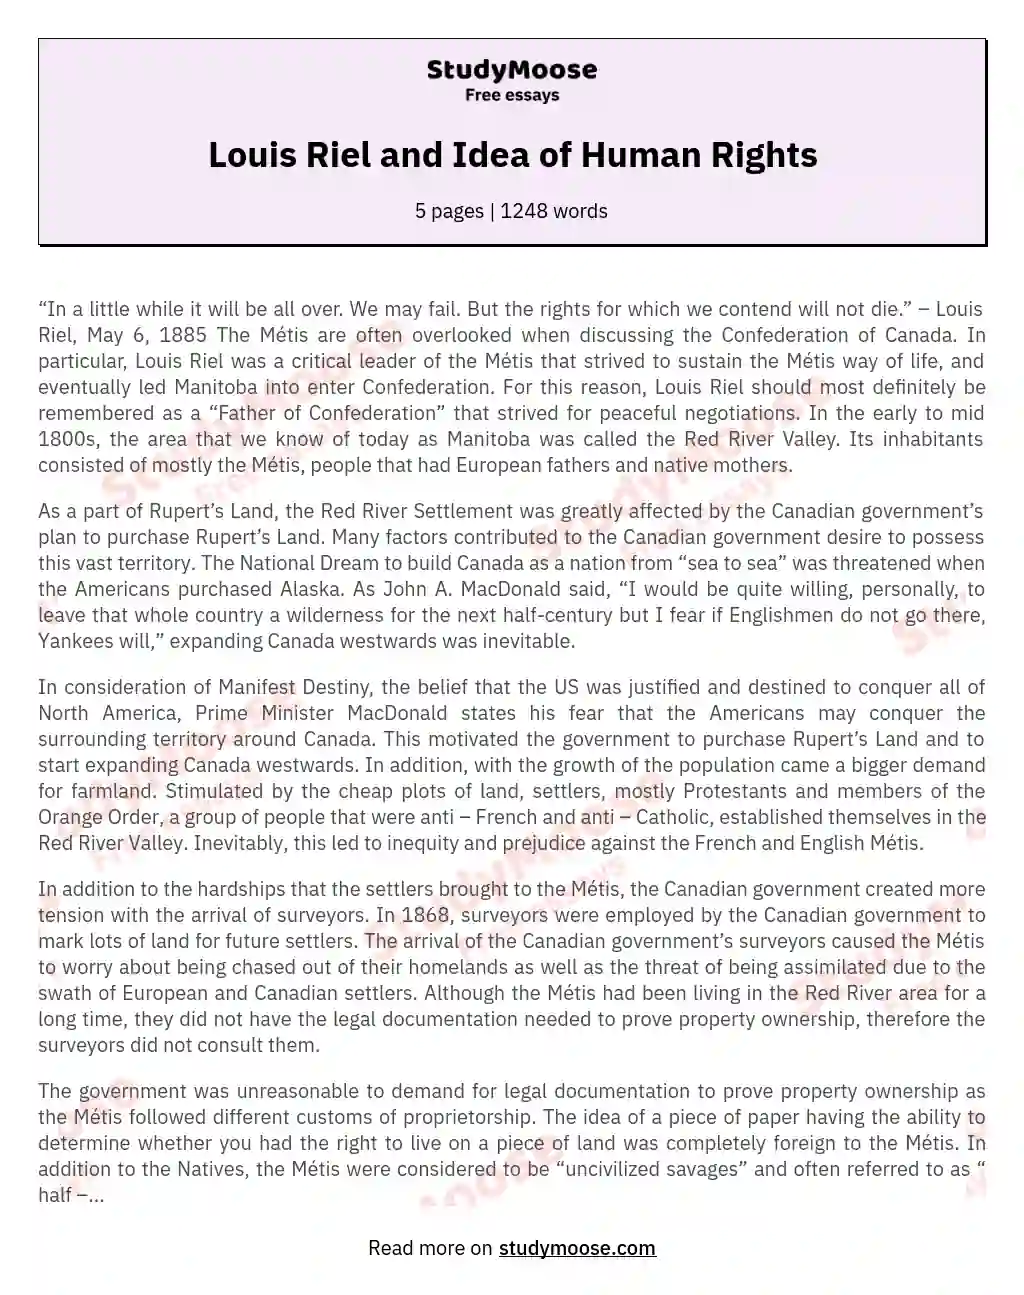 Louis Riel and Idea of Human Rights essay